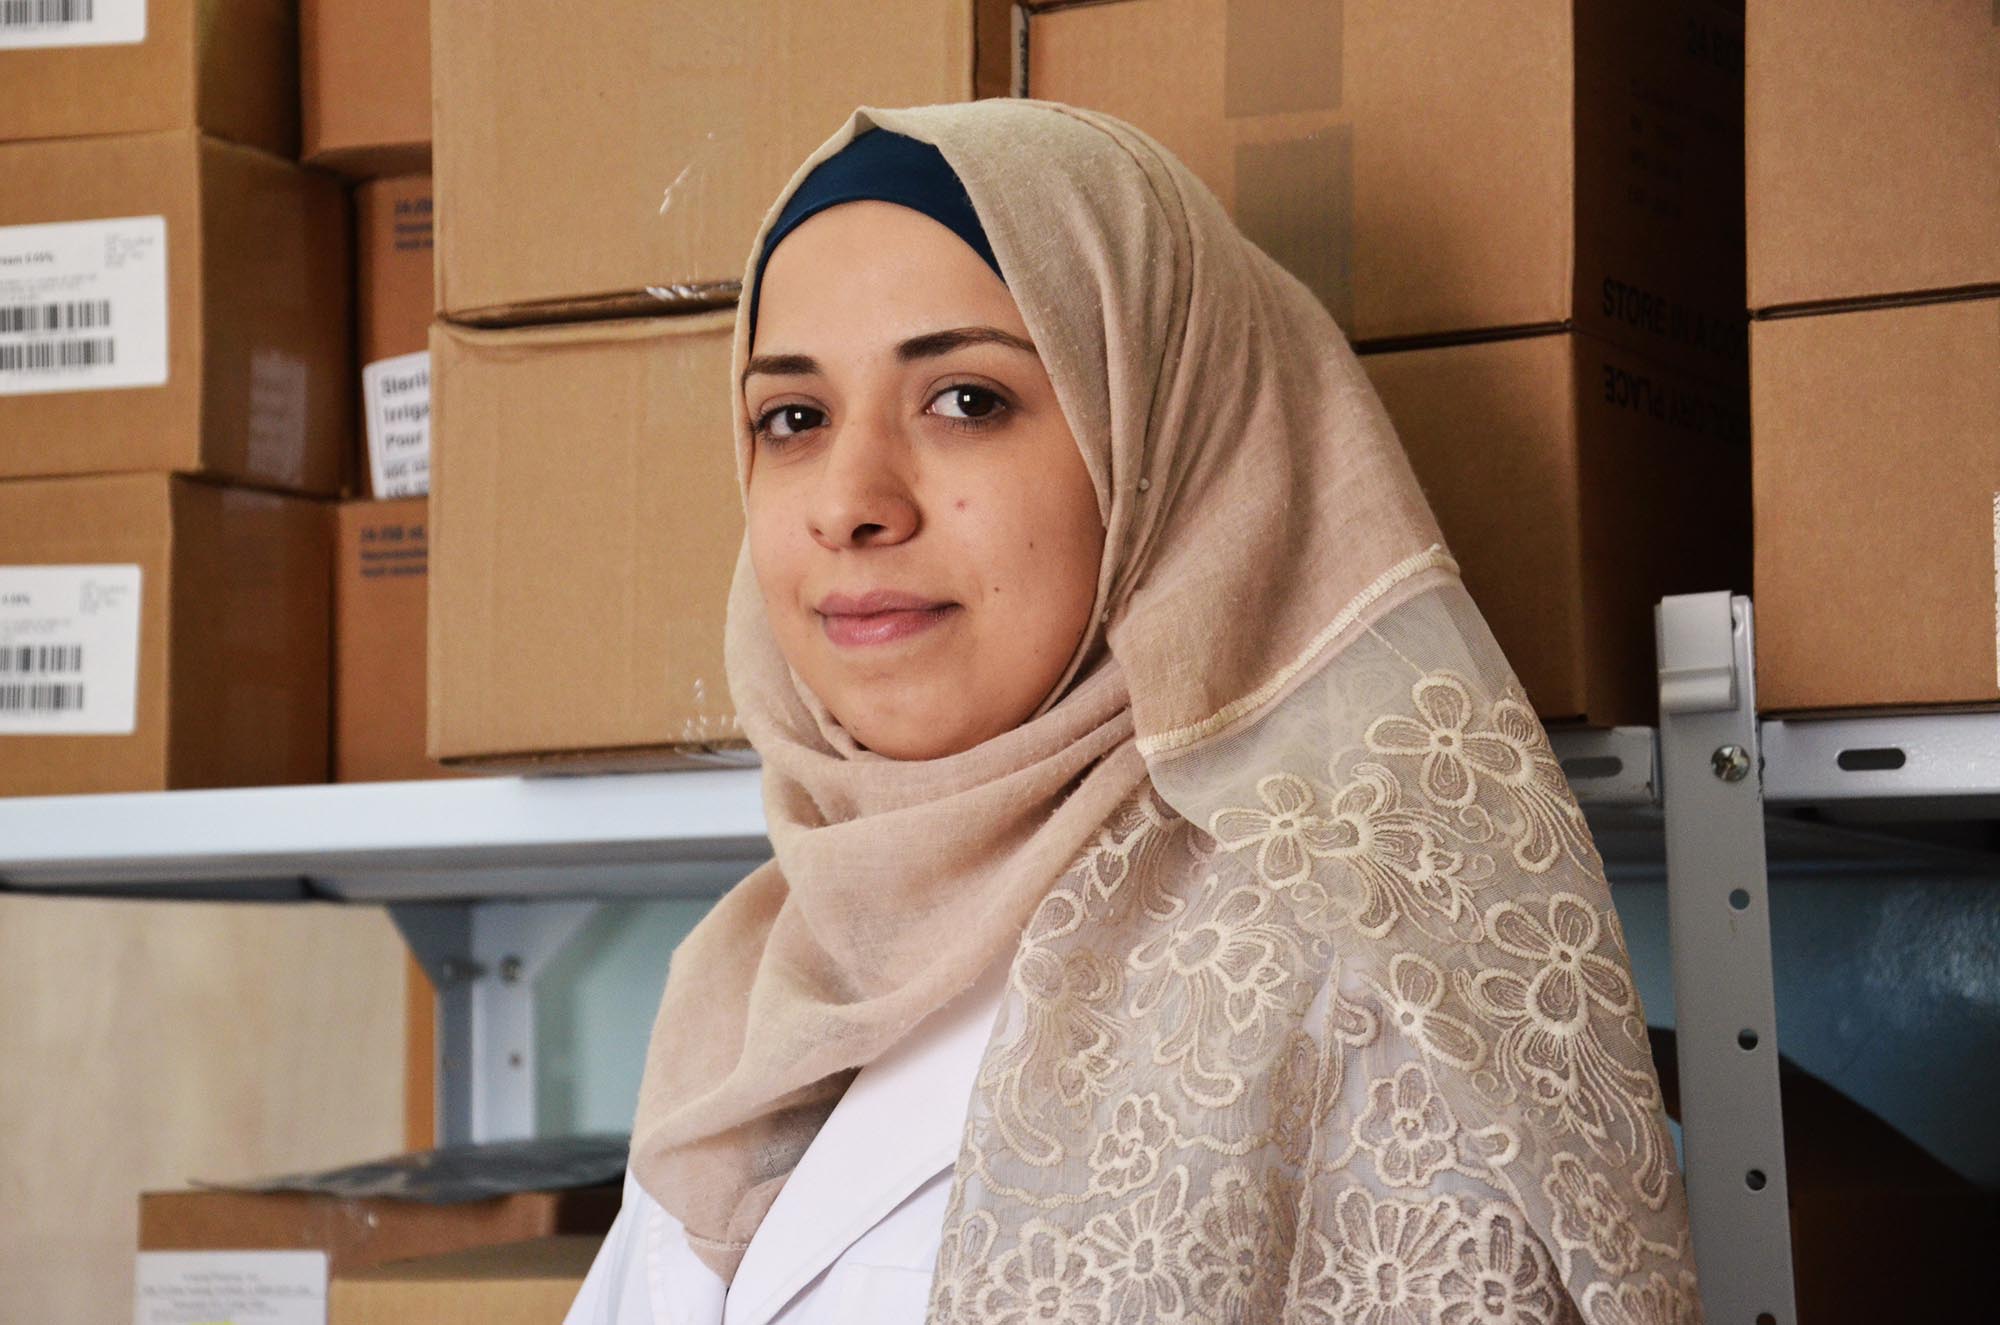 Bayan is the pharmacist at the health care center in Hebron, Palestine.